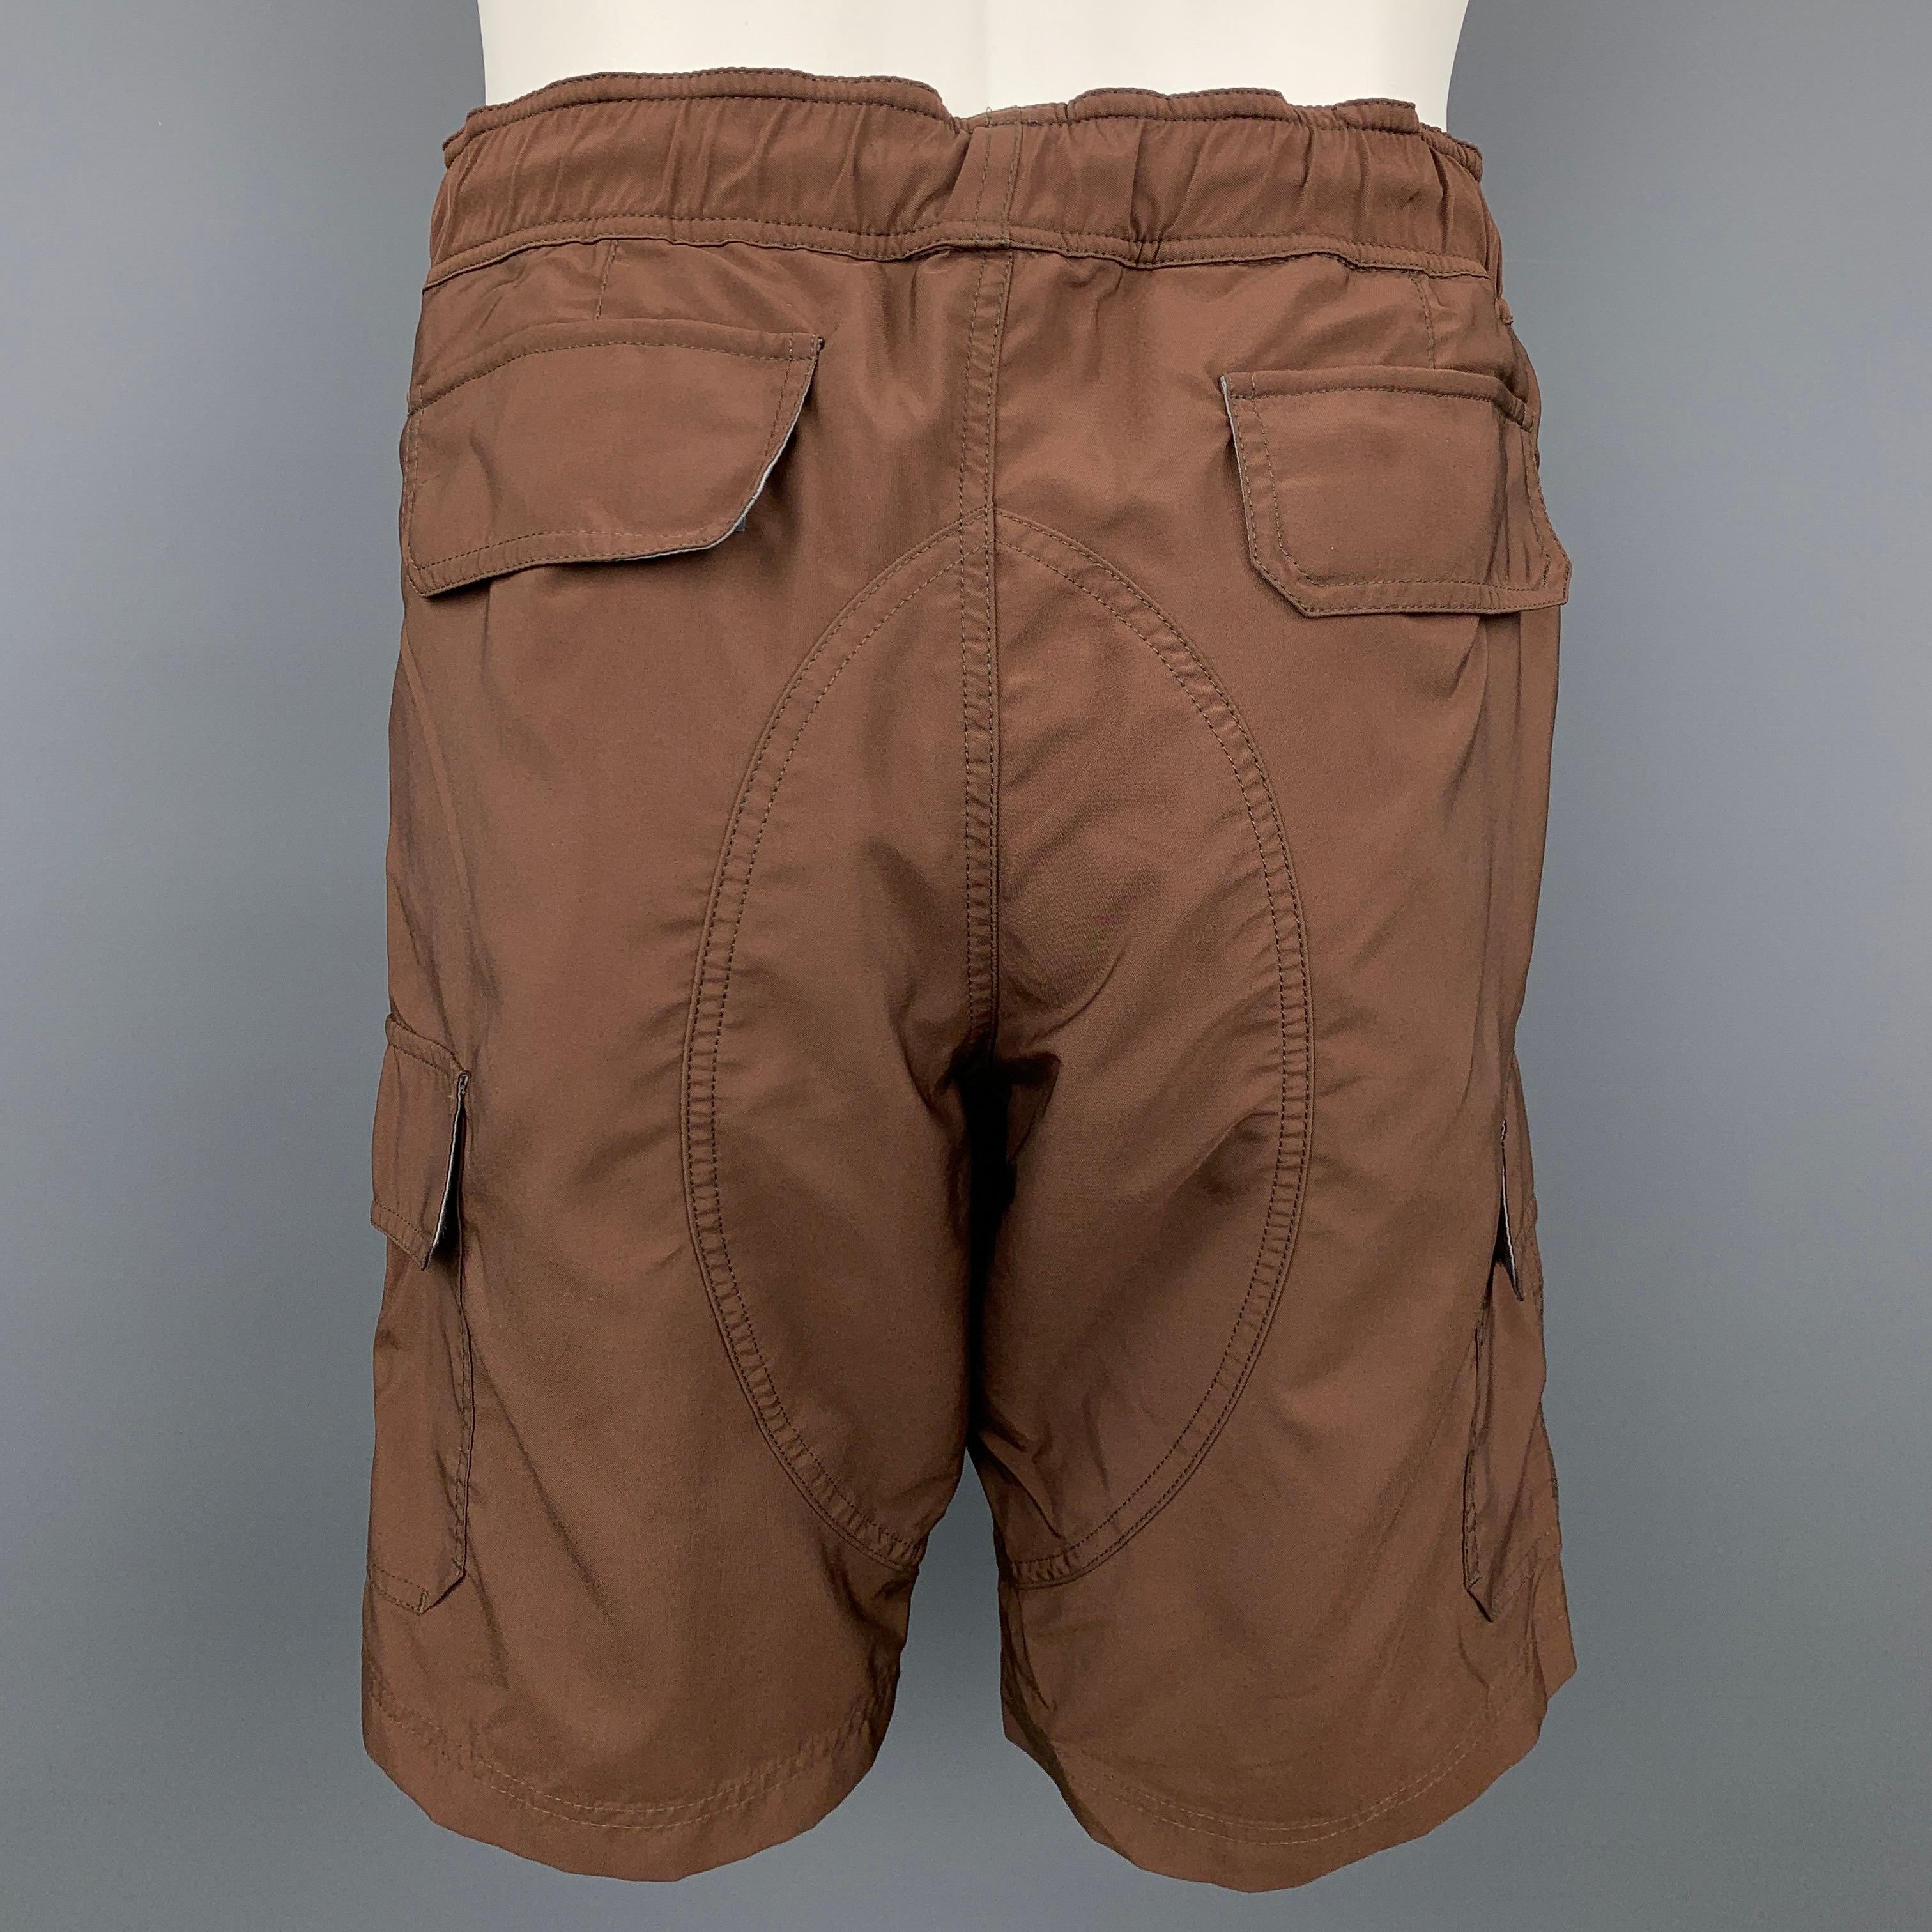 BRUNELLO CUCINELLI shorts comes in a brown polyester with a mesh liner featuring a cargo pockets, drawstring, zip fly, and a snap button closure. Made in Italy.

New With Tags.
Marked: 50
Original Retail Price: $725.00

Measurements:

Waist: 34